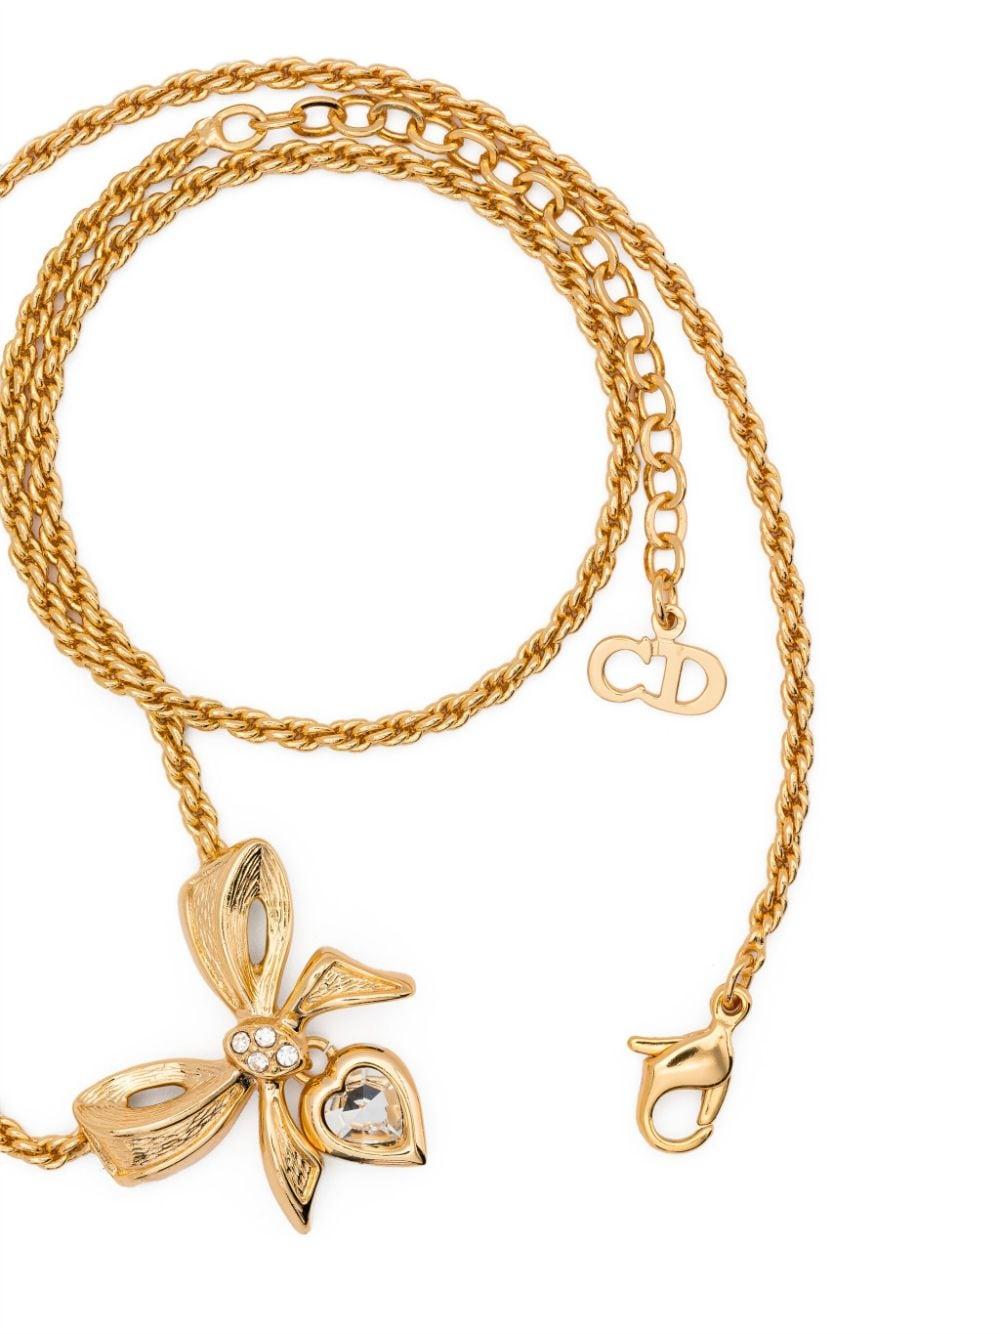 Dior gold-tone rhinestone-detailing bow-pendant necklace featuring bow pendant, heart charm, rhinestone detailing, signature CD logo charm, adjustable fit, rope chain, lobster claw fastening.
Length 17.3 in (44 cm)
Pendant Length 0.9in (